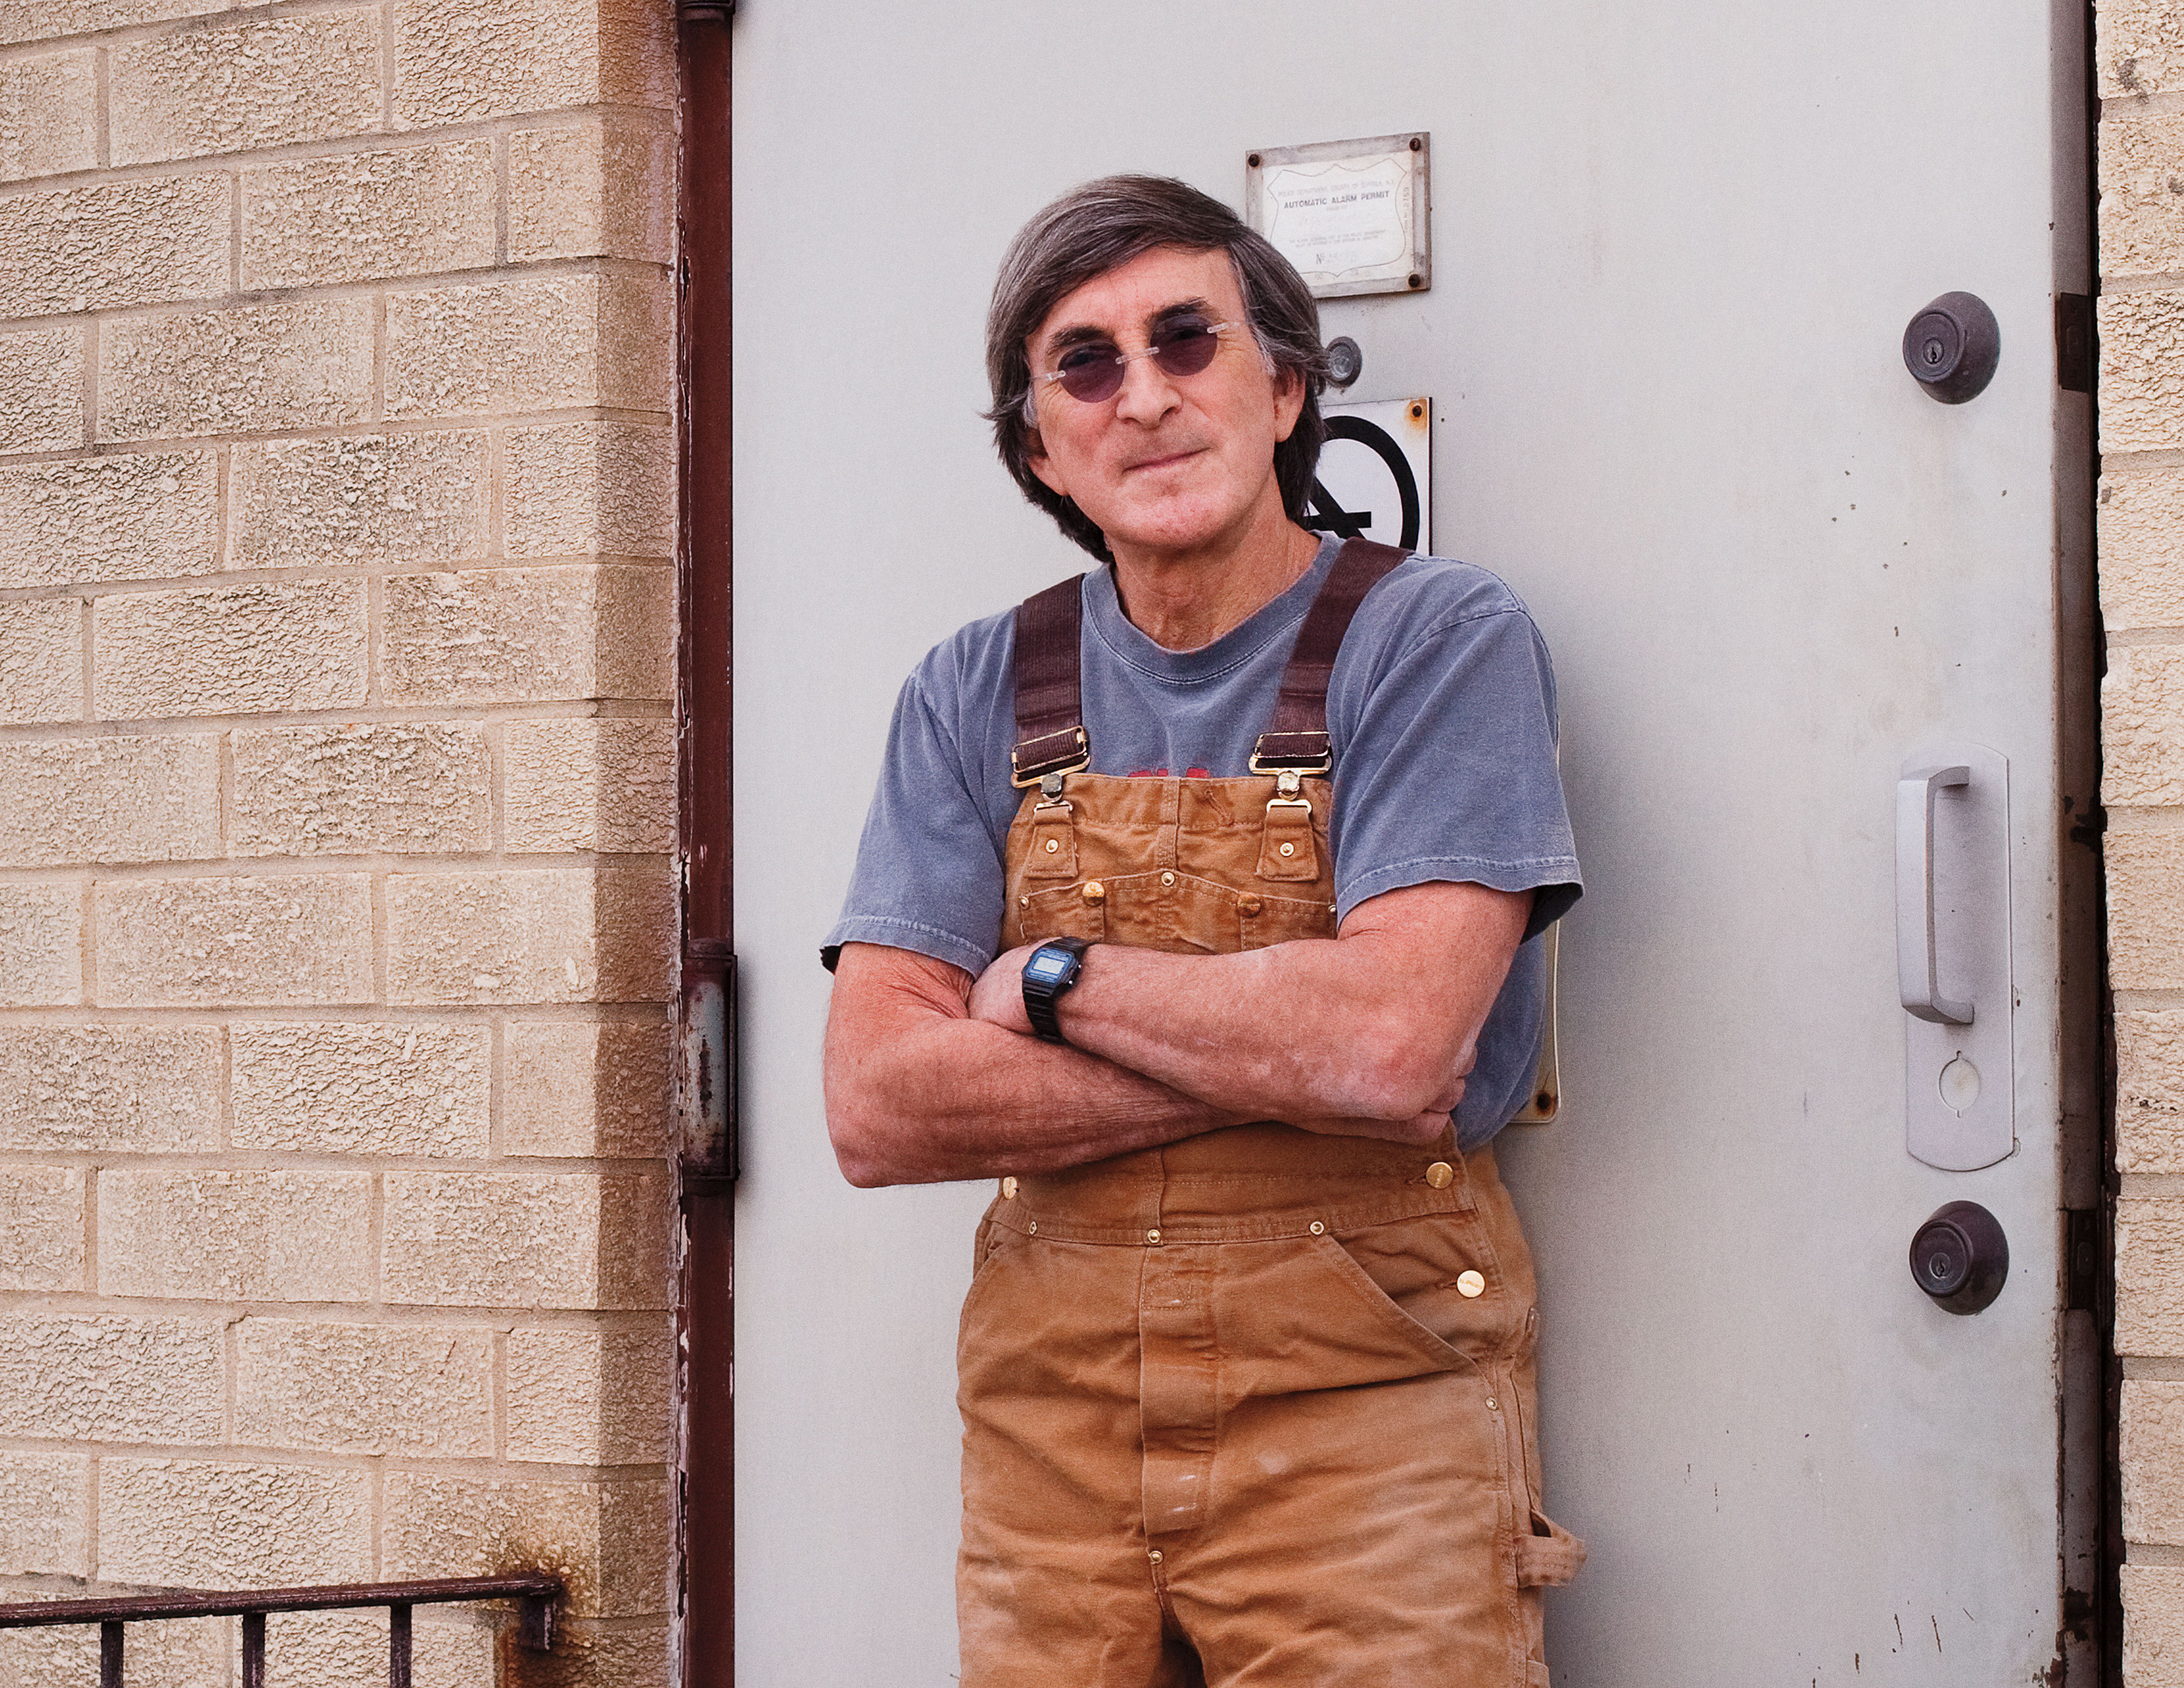 A man wearing sunglasses, a blue T-shirt, and brown overalls leans against a door